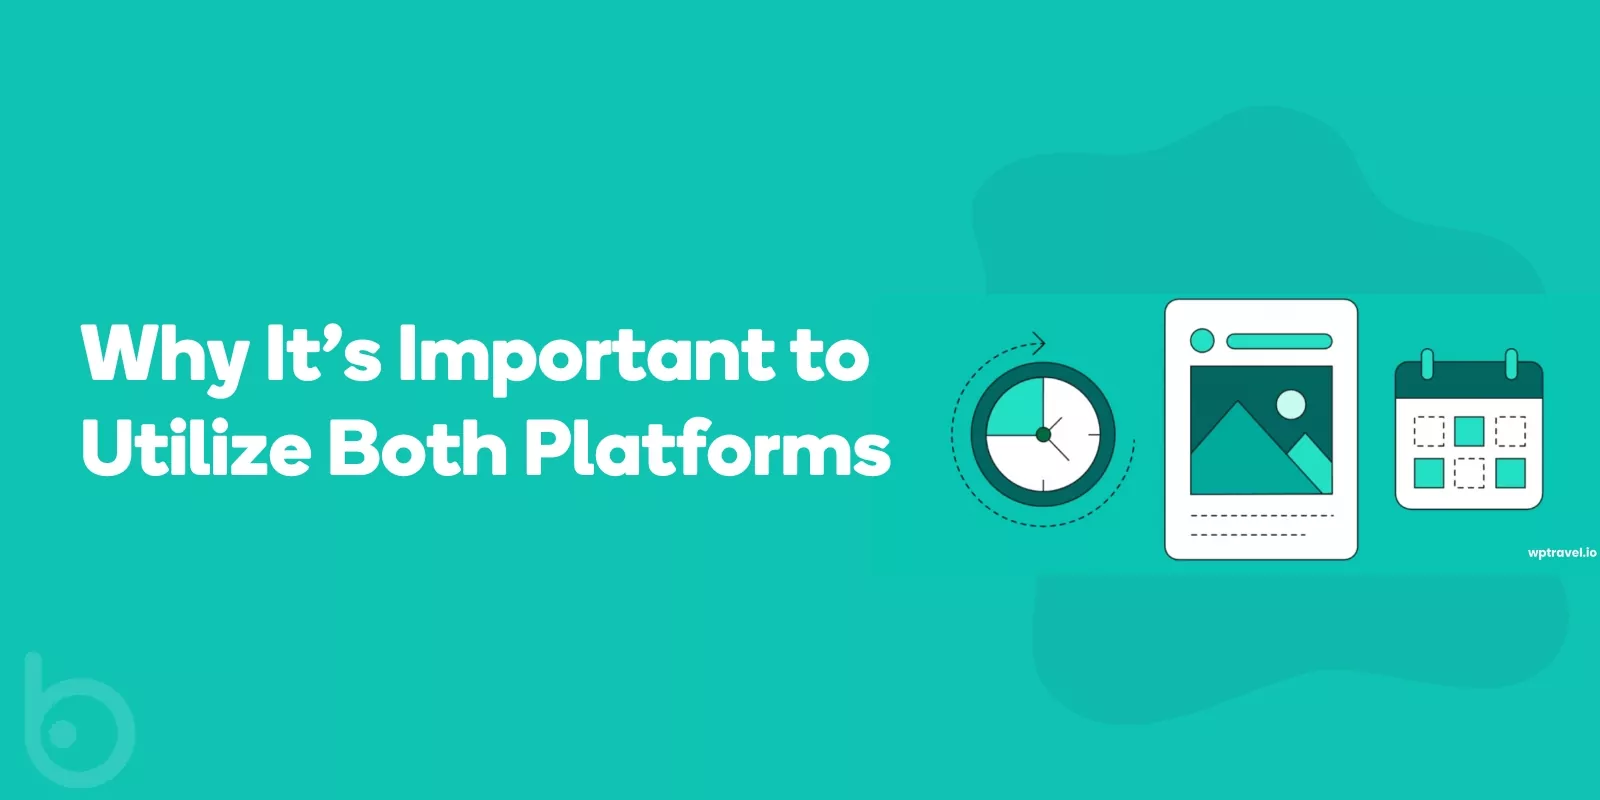 Why It's Important to Utilize Both Platforms